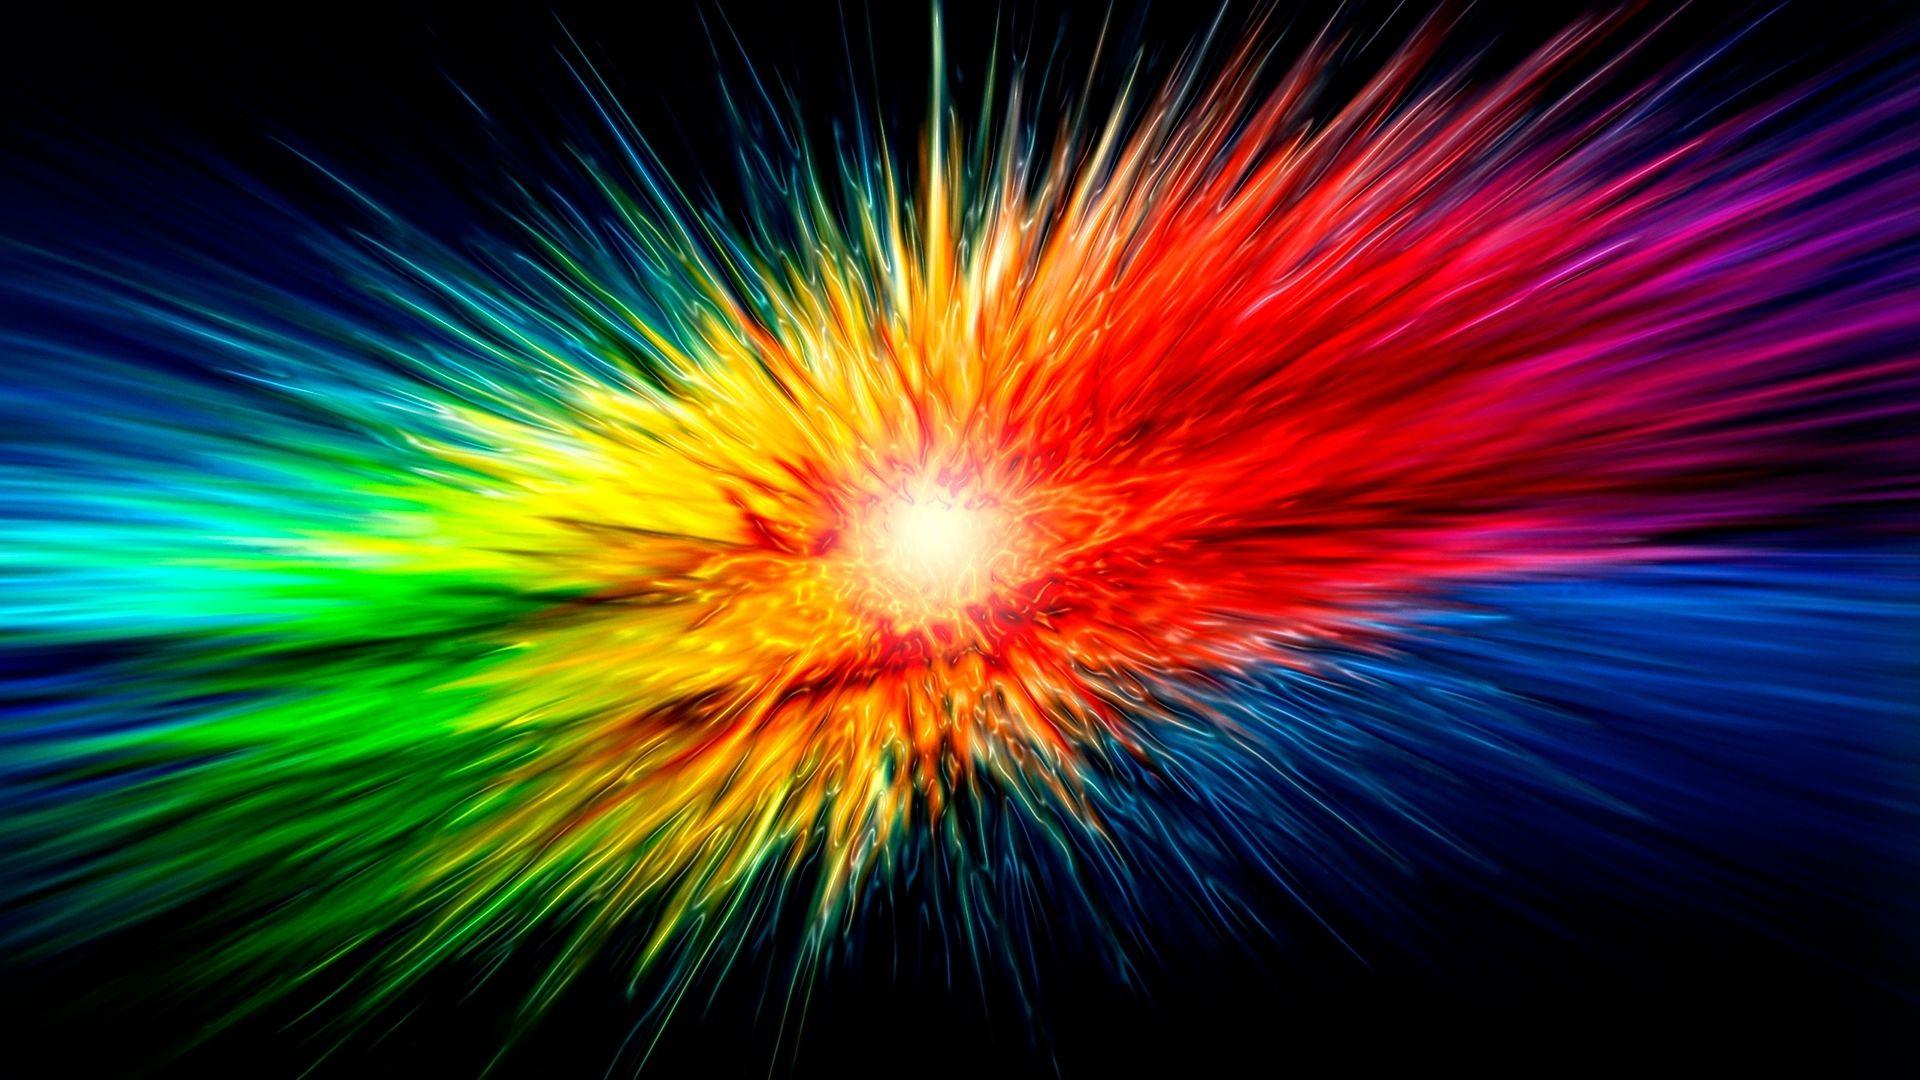 HD Wallpaper Widescreen 1080P 3D.. Size. More color boom 1080p HD wallpaper 1920x1080 epic. Rainbow wallpaper, Rainbow abstract, Desktop background picture